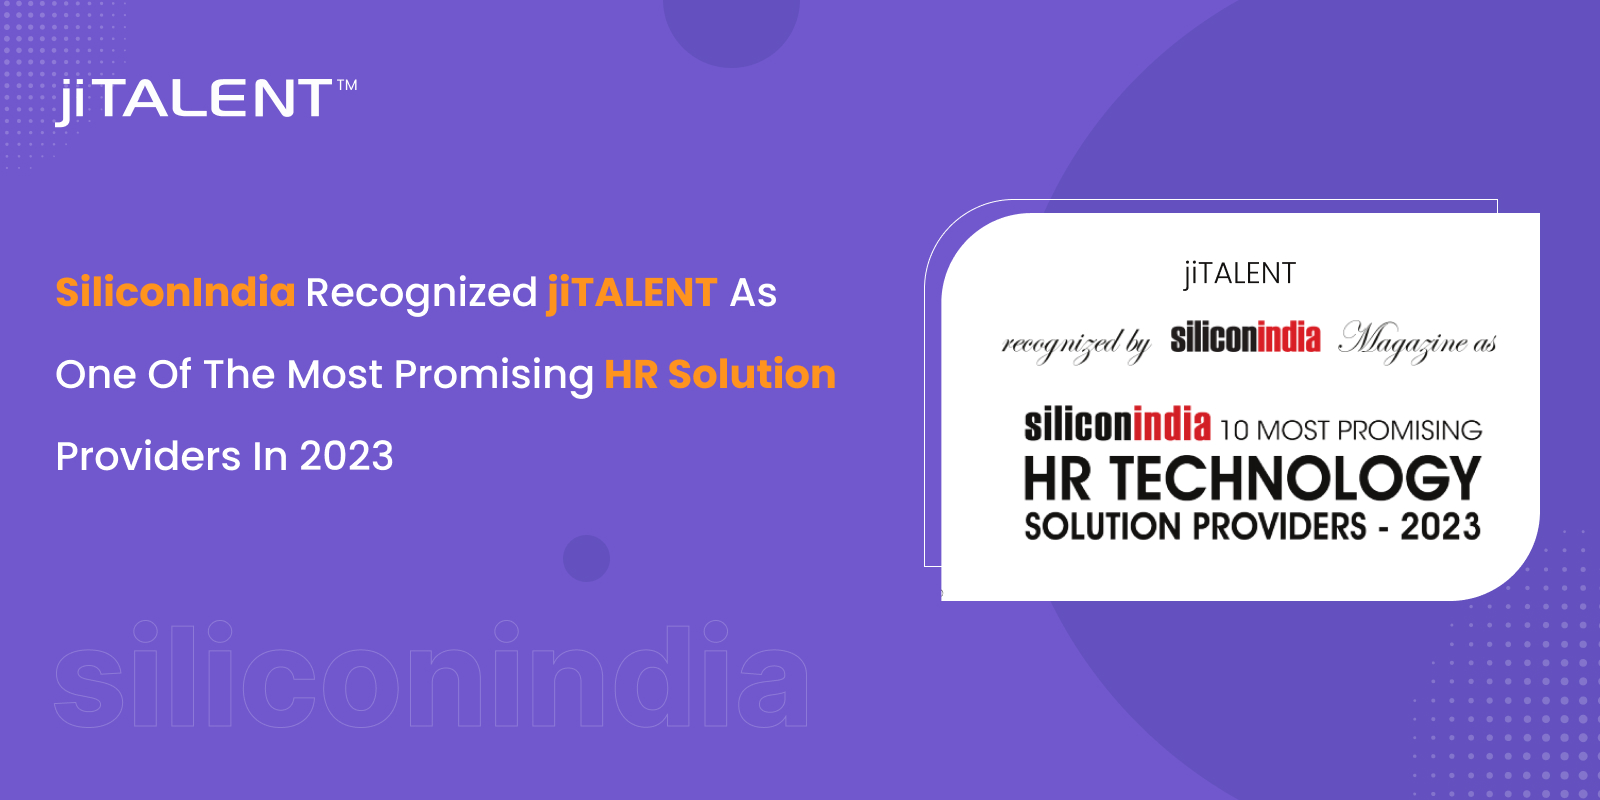 SiliconIndia Recognized jiTALENT As One Of The Most Promising HR Solution Providers In 2023